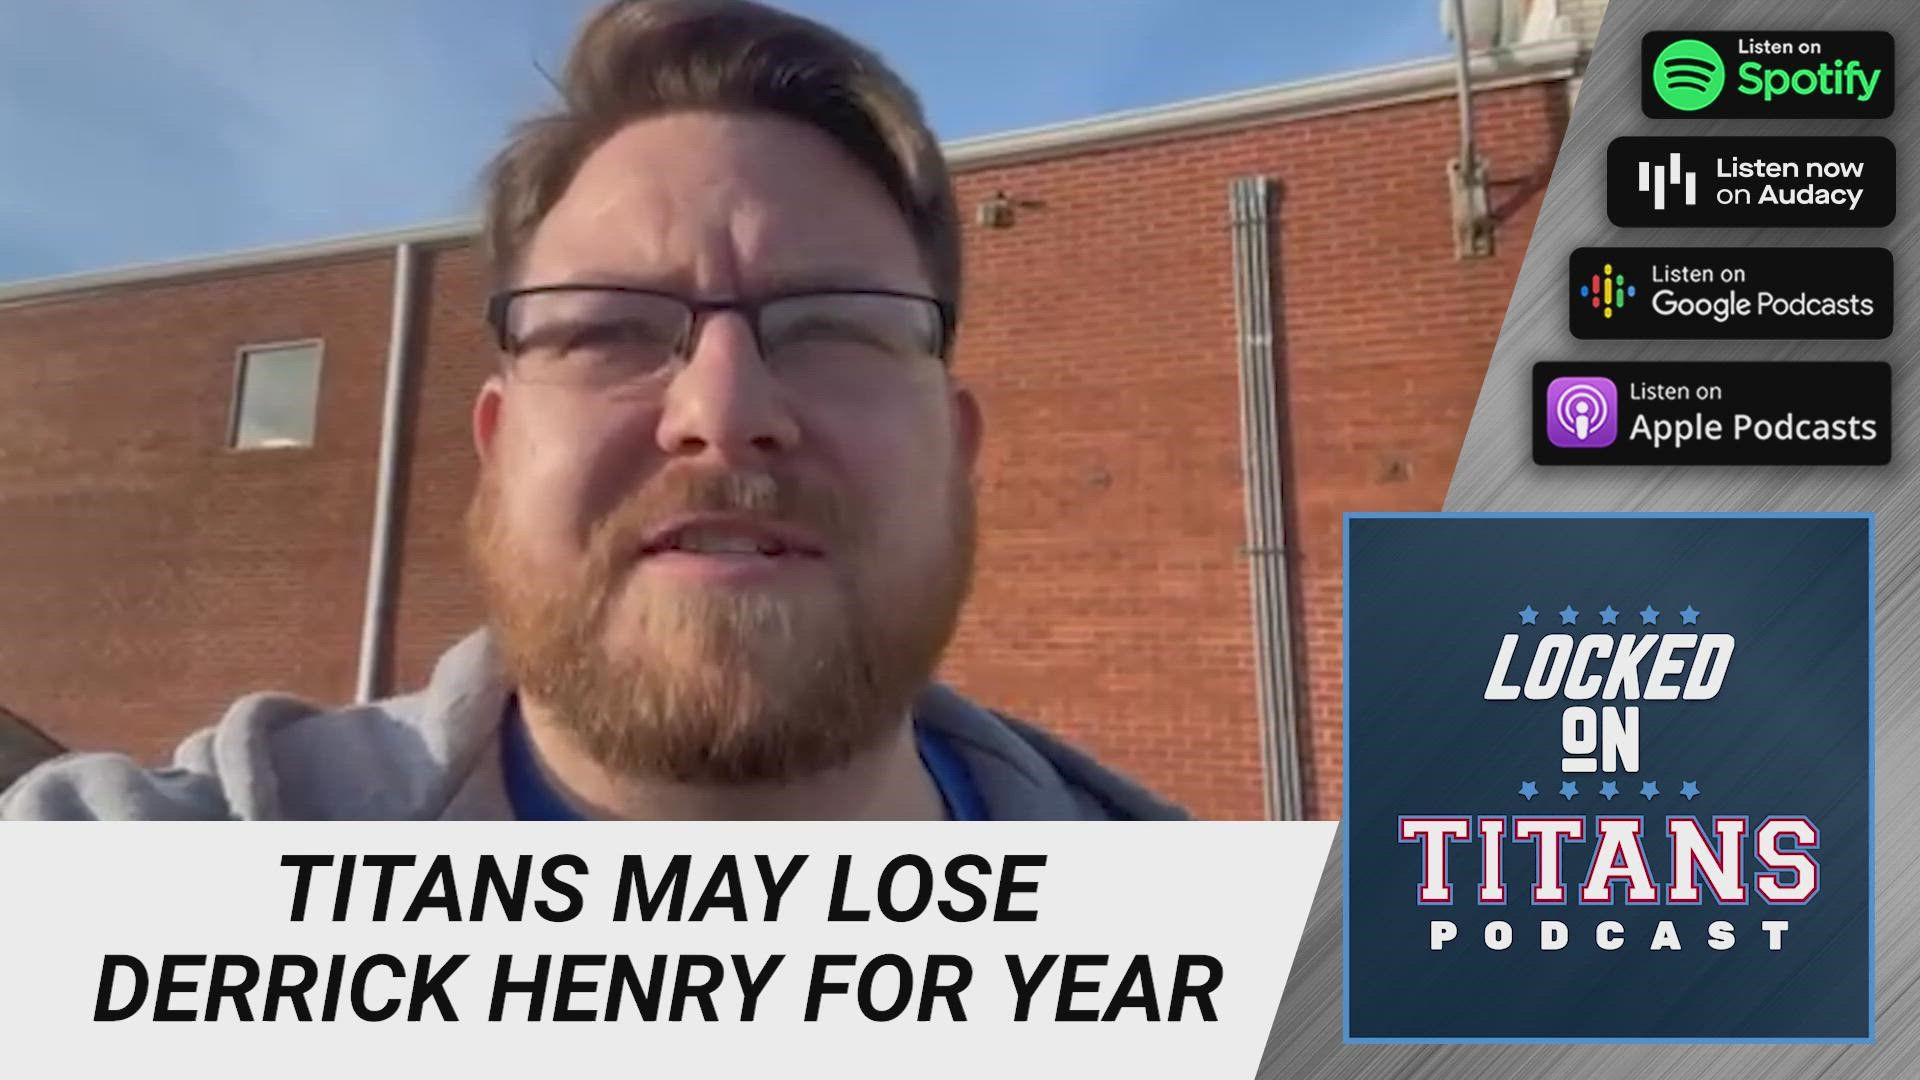 Locked On Titans host Tyler Rowland reacts to the Monday morning news that Derrick Henry may be out for the rest of the year with a foot injury.